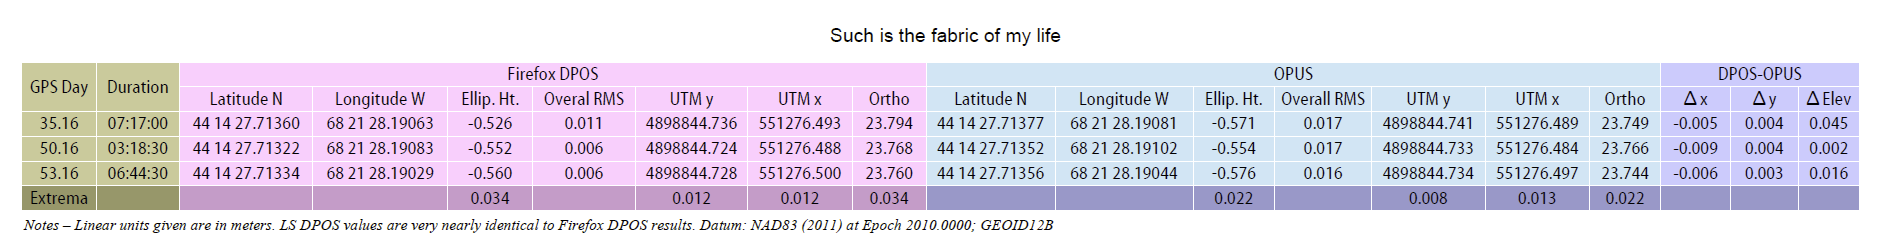 Such is the fabric of my life.PNG